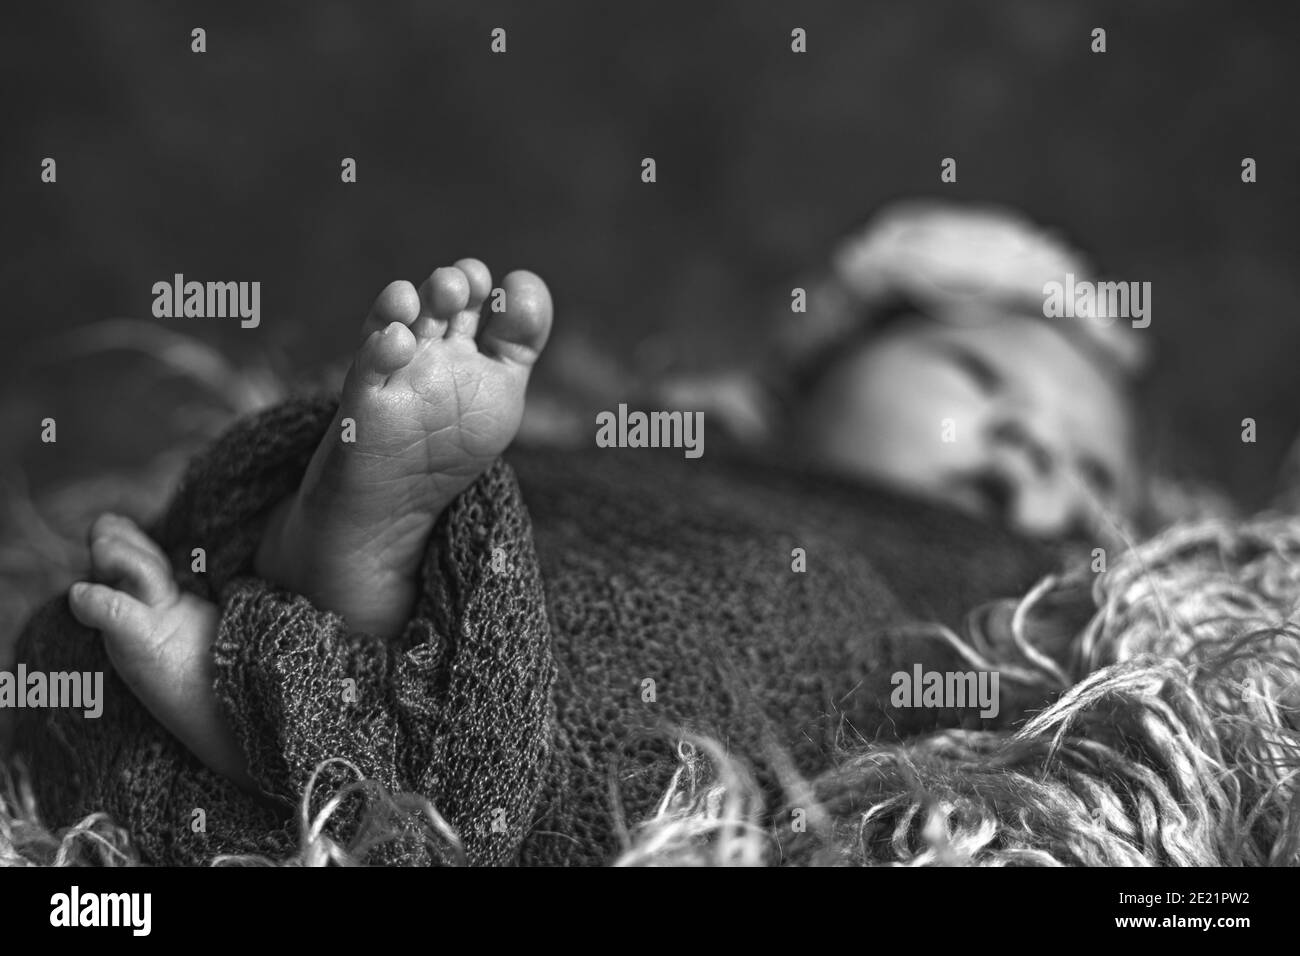 Black and white image of a newborn baby girl with copy space Stock Photo